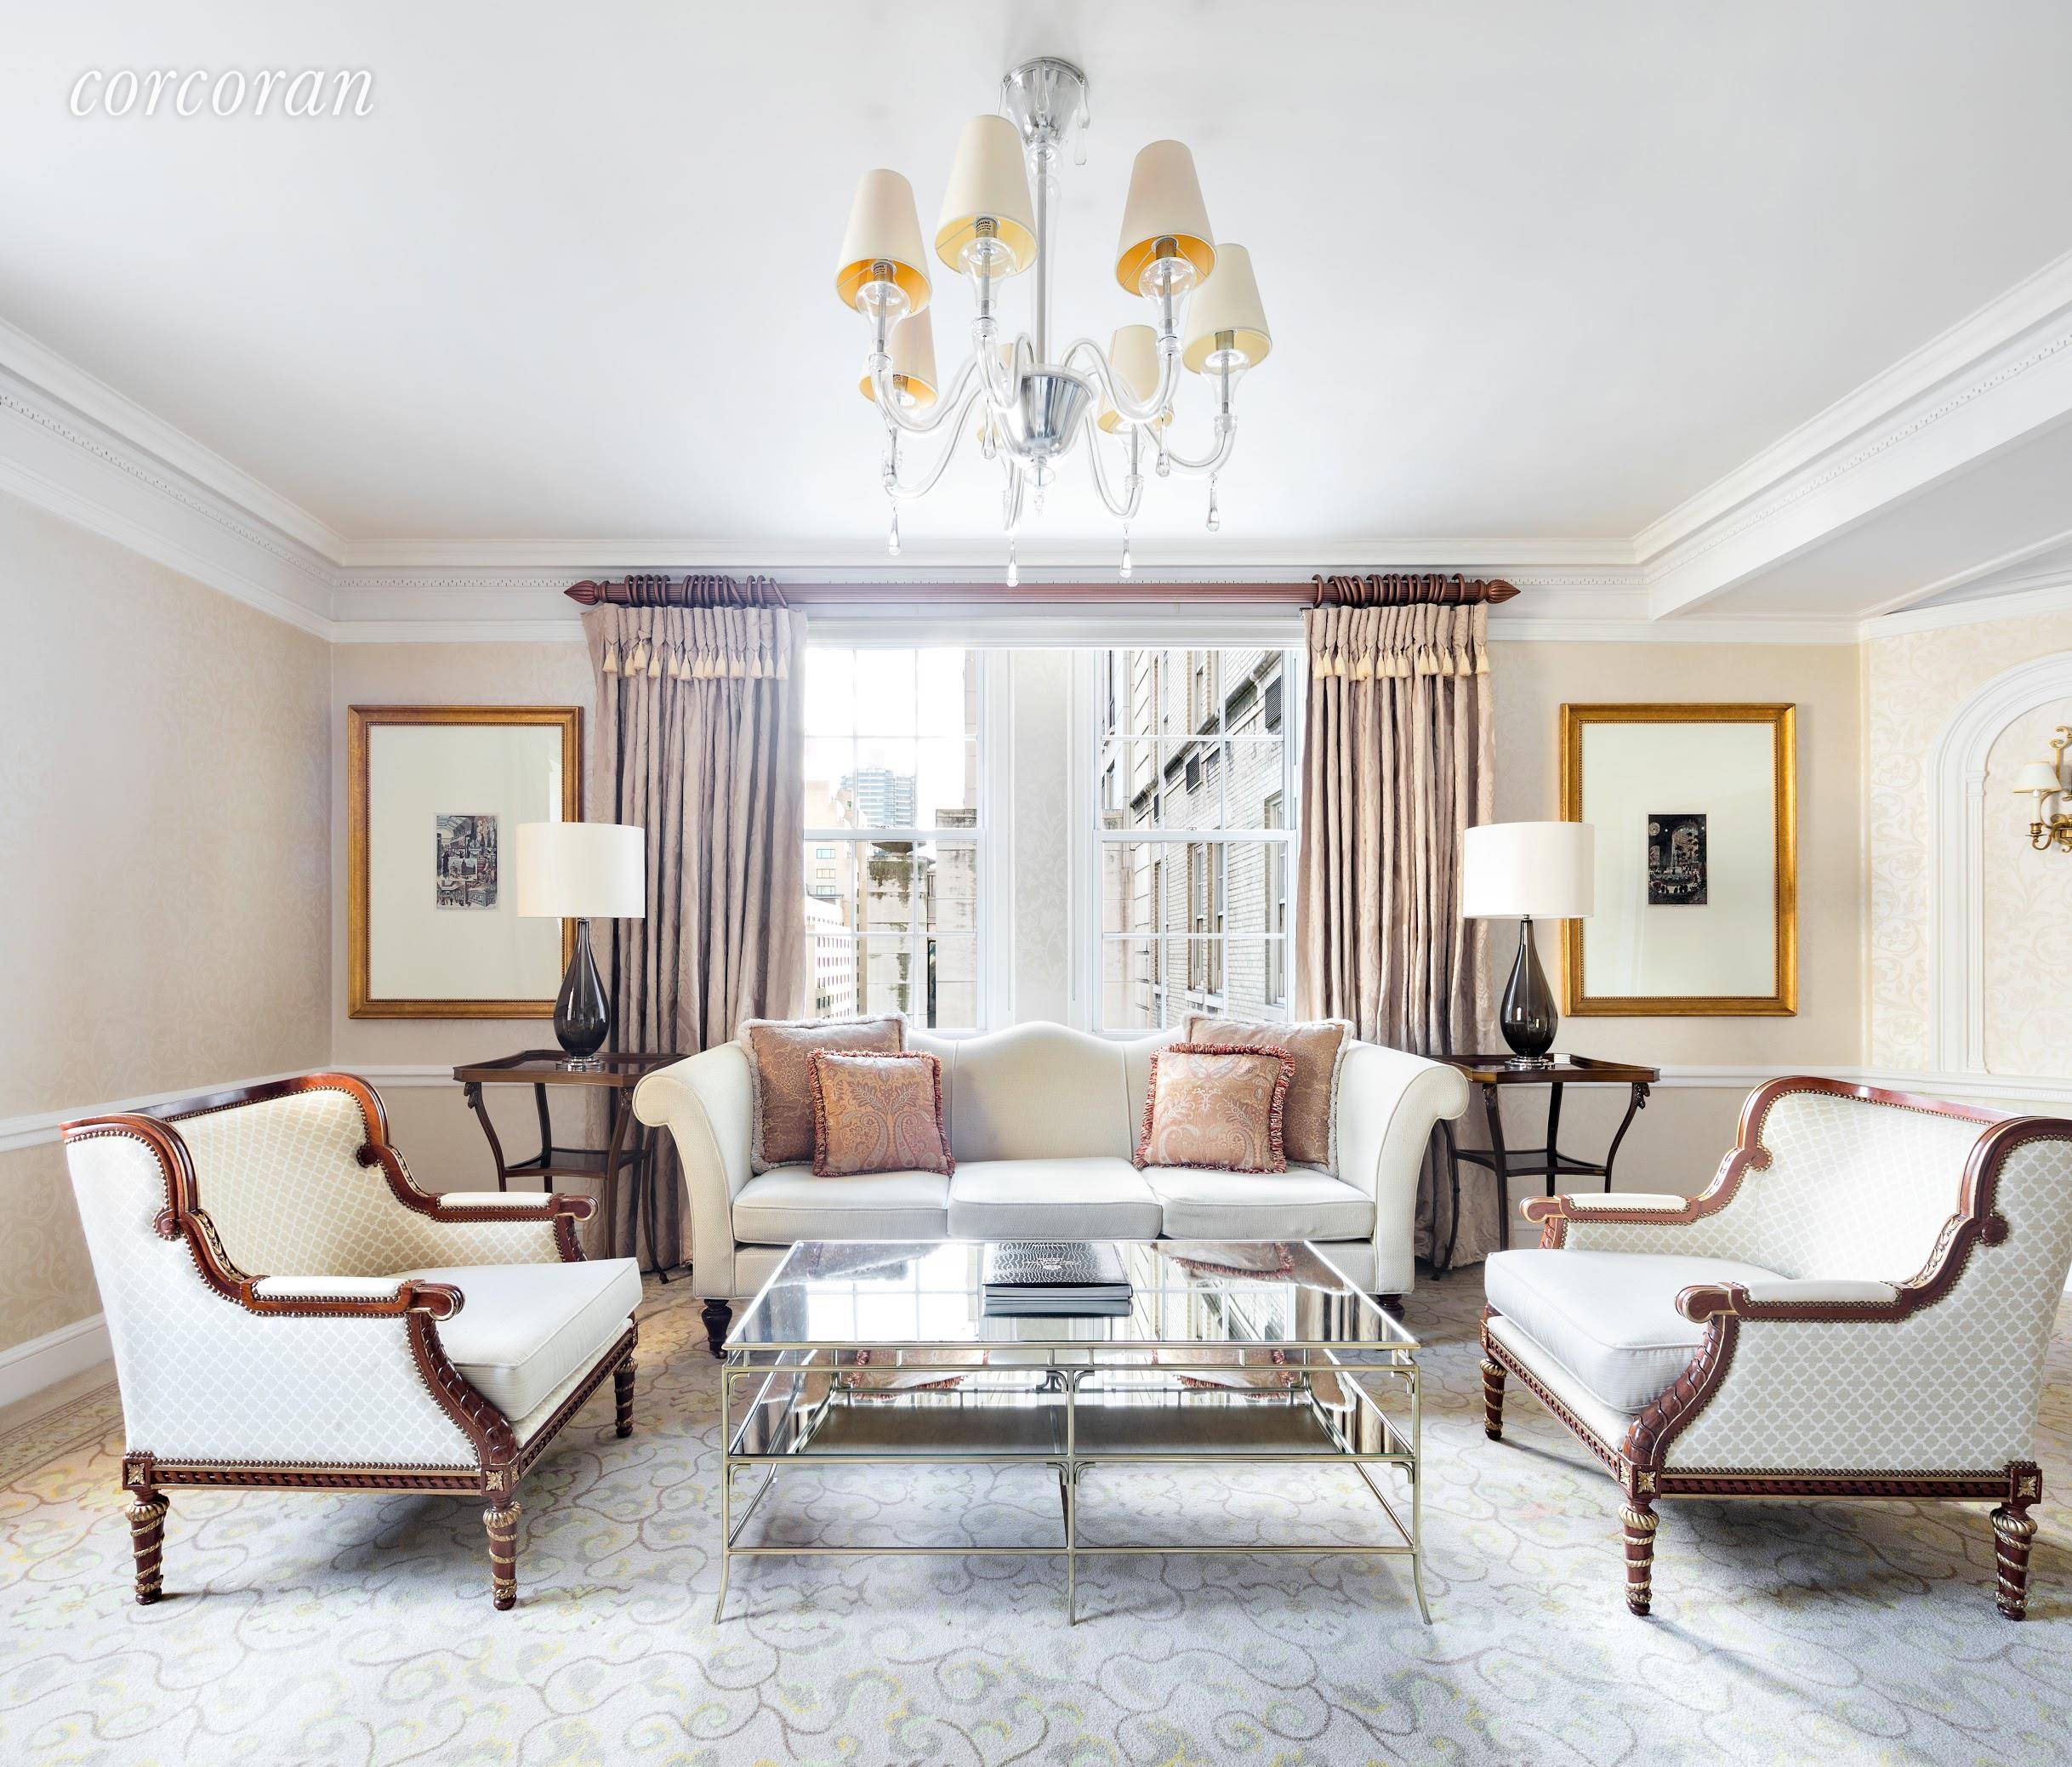 Surrounded by iconic views of Central Park and the Upper East Side, this two bedroom residence is elegant and luxurious.